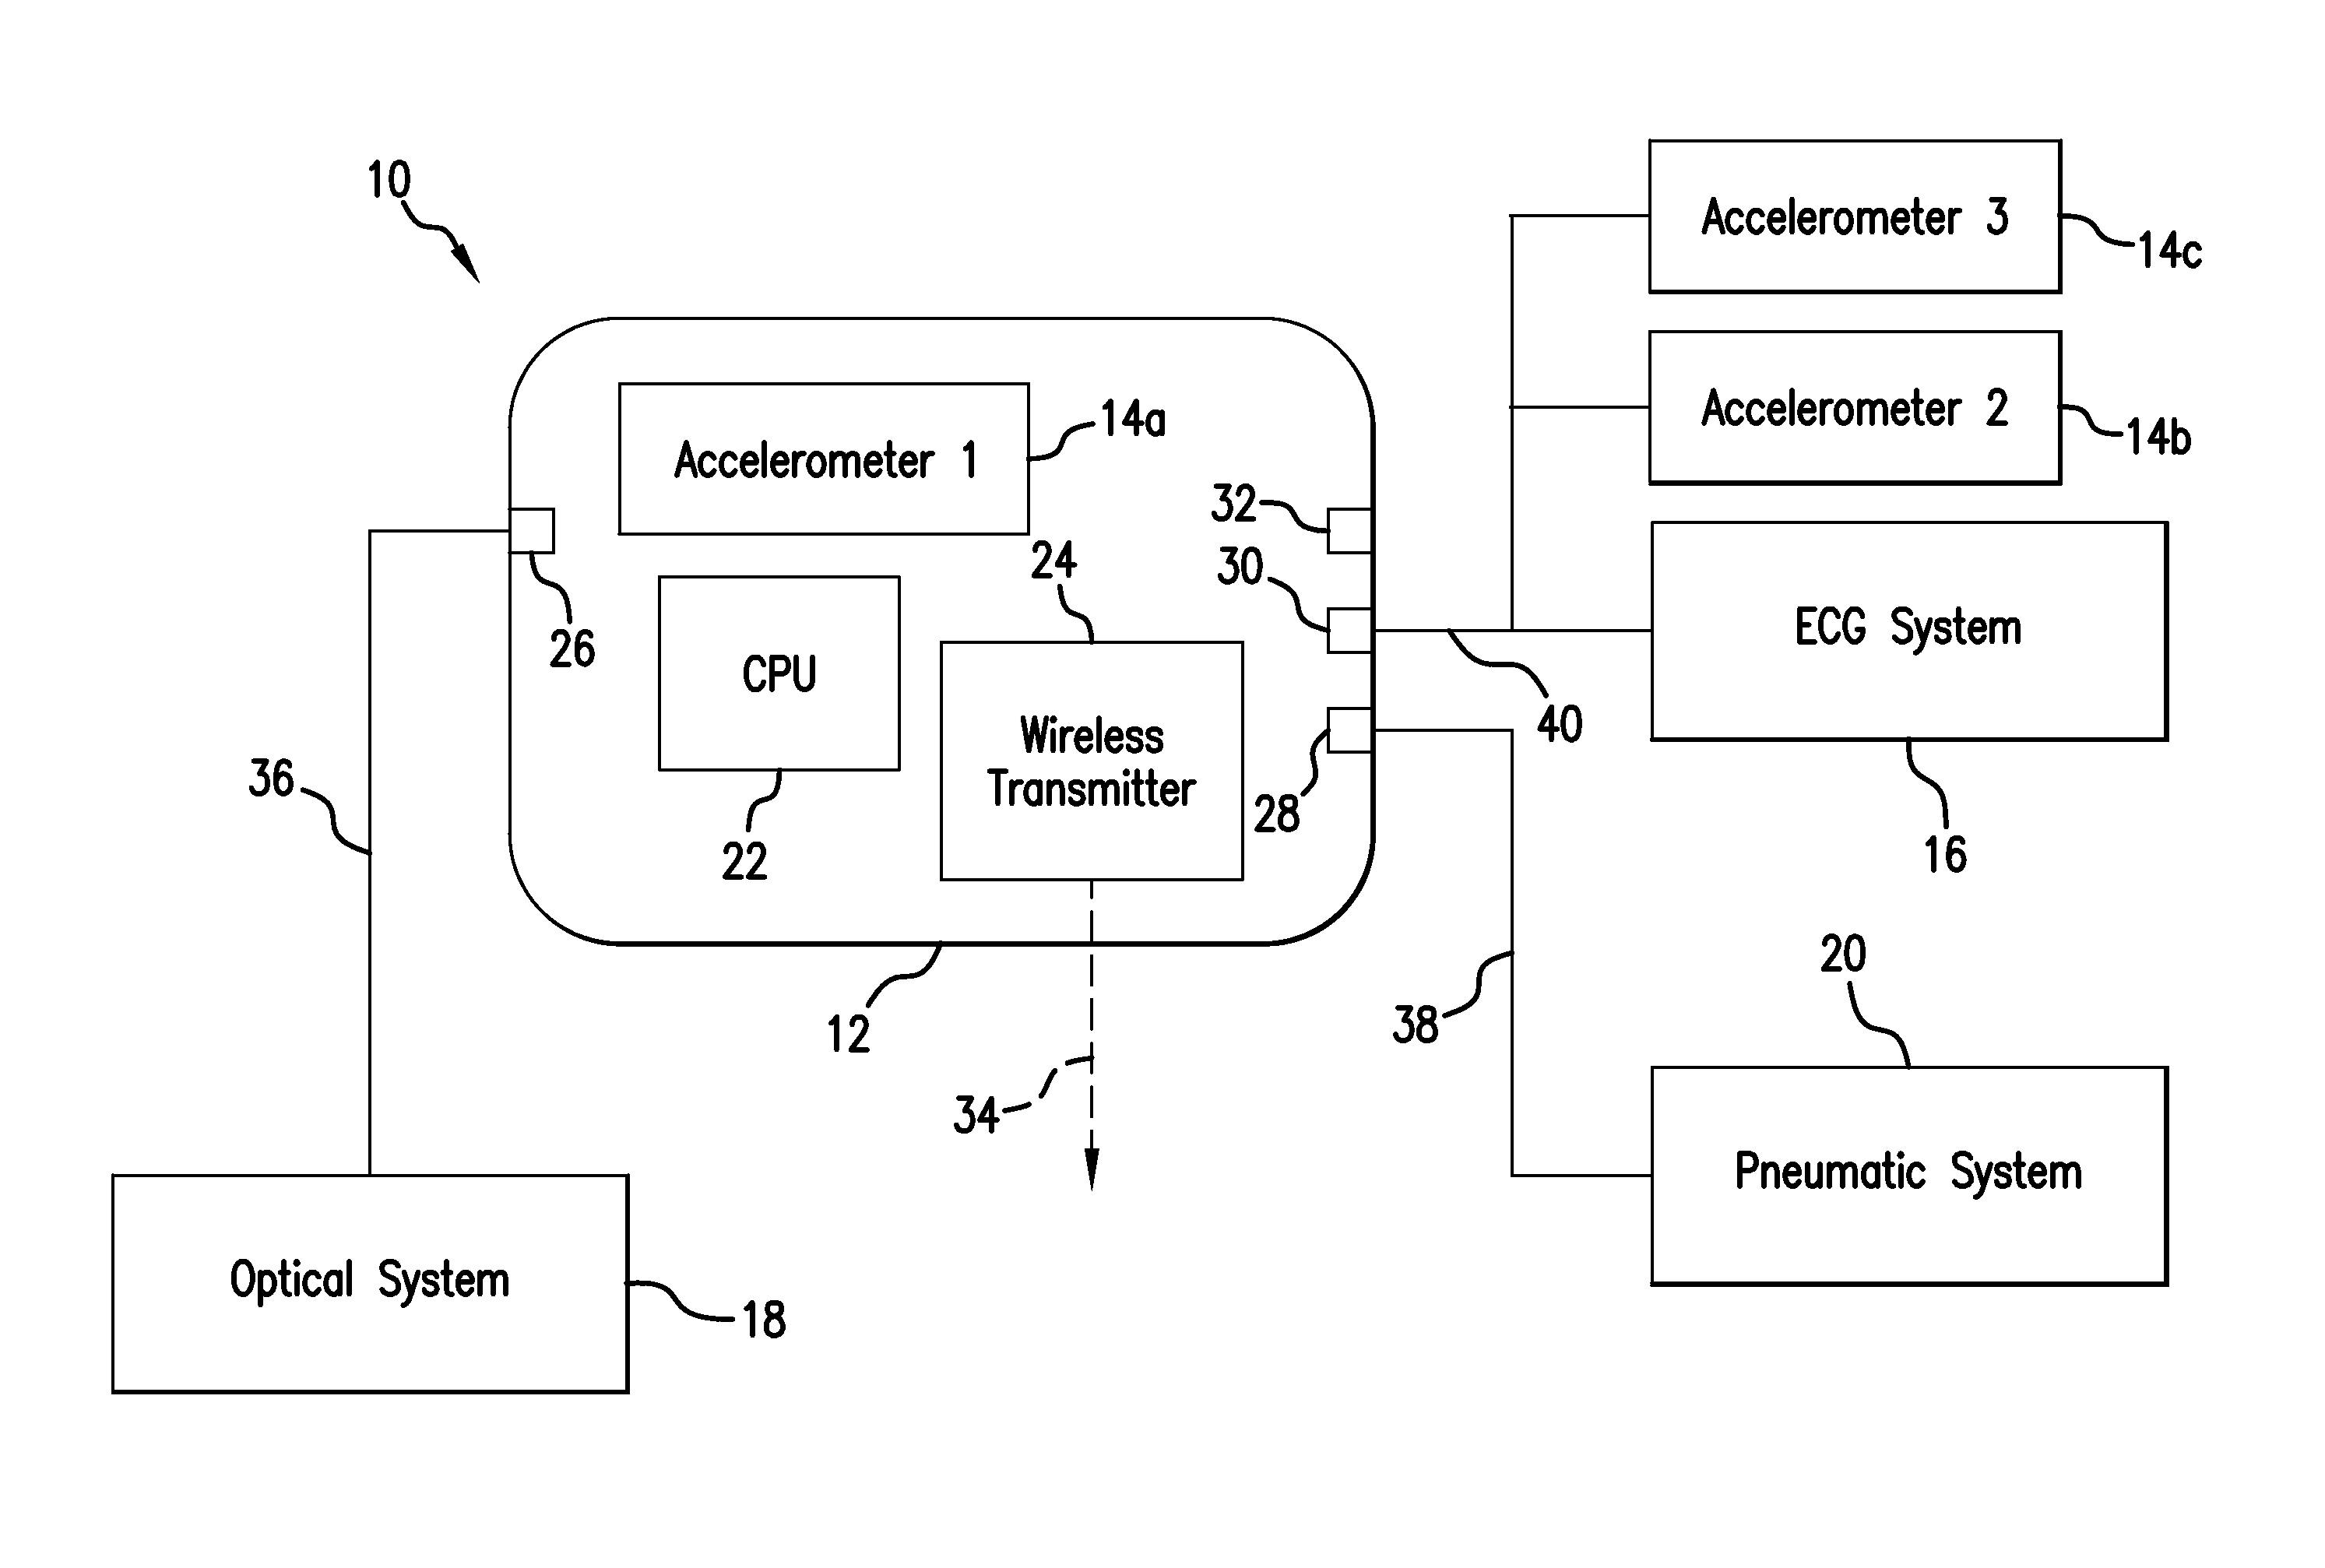 Method for continuously monitoring a patient using a body-worn device and associated system for alarms/alerts